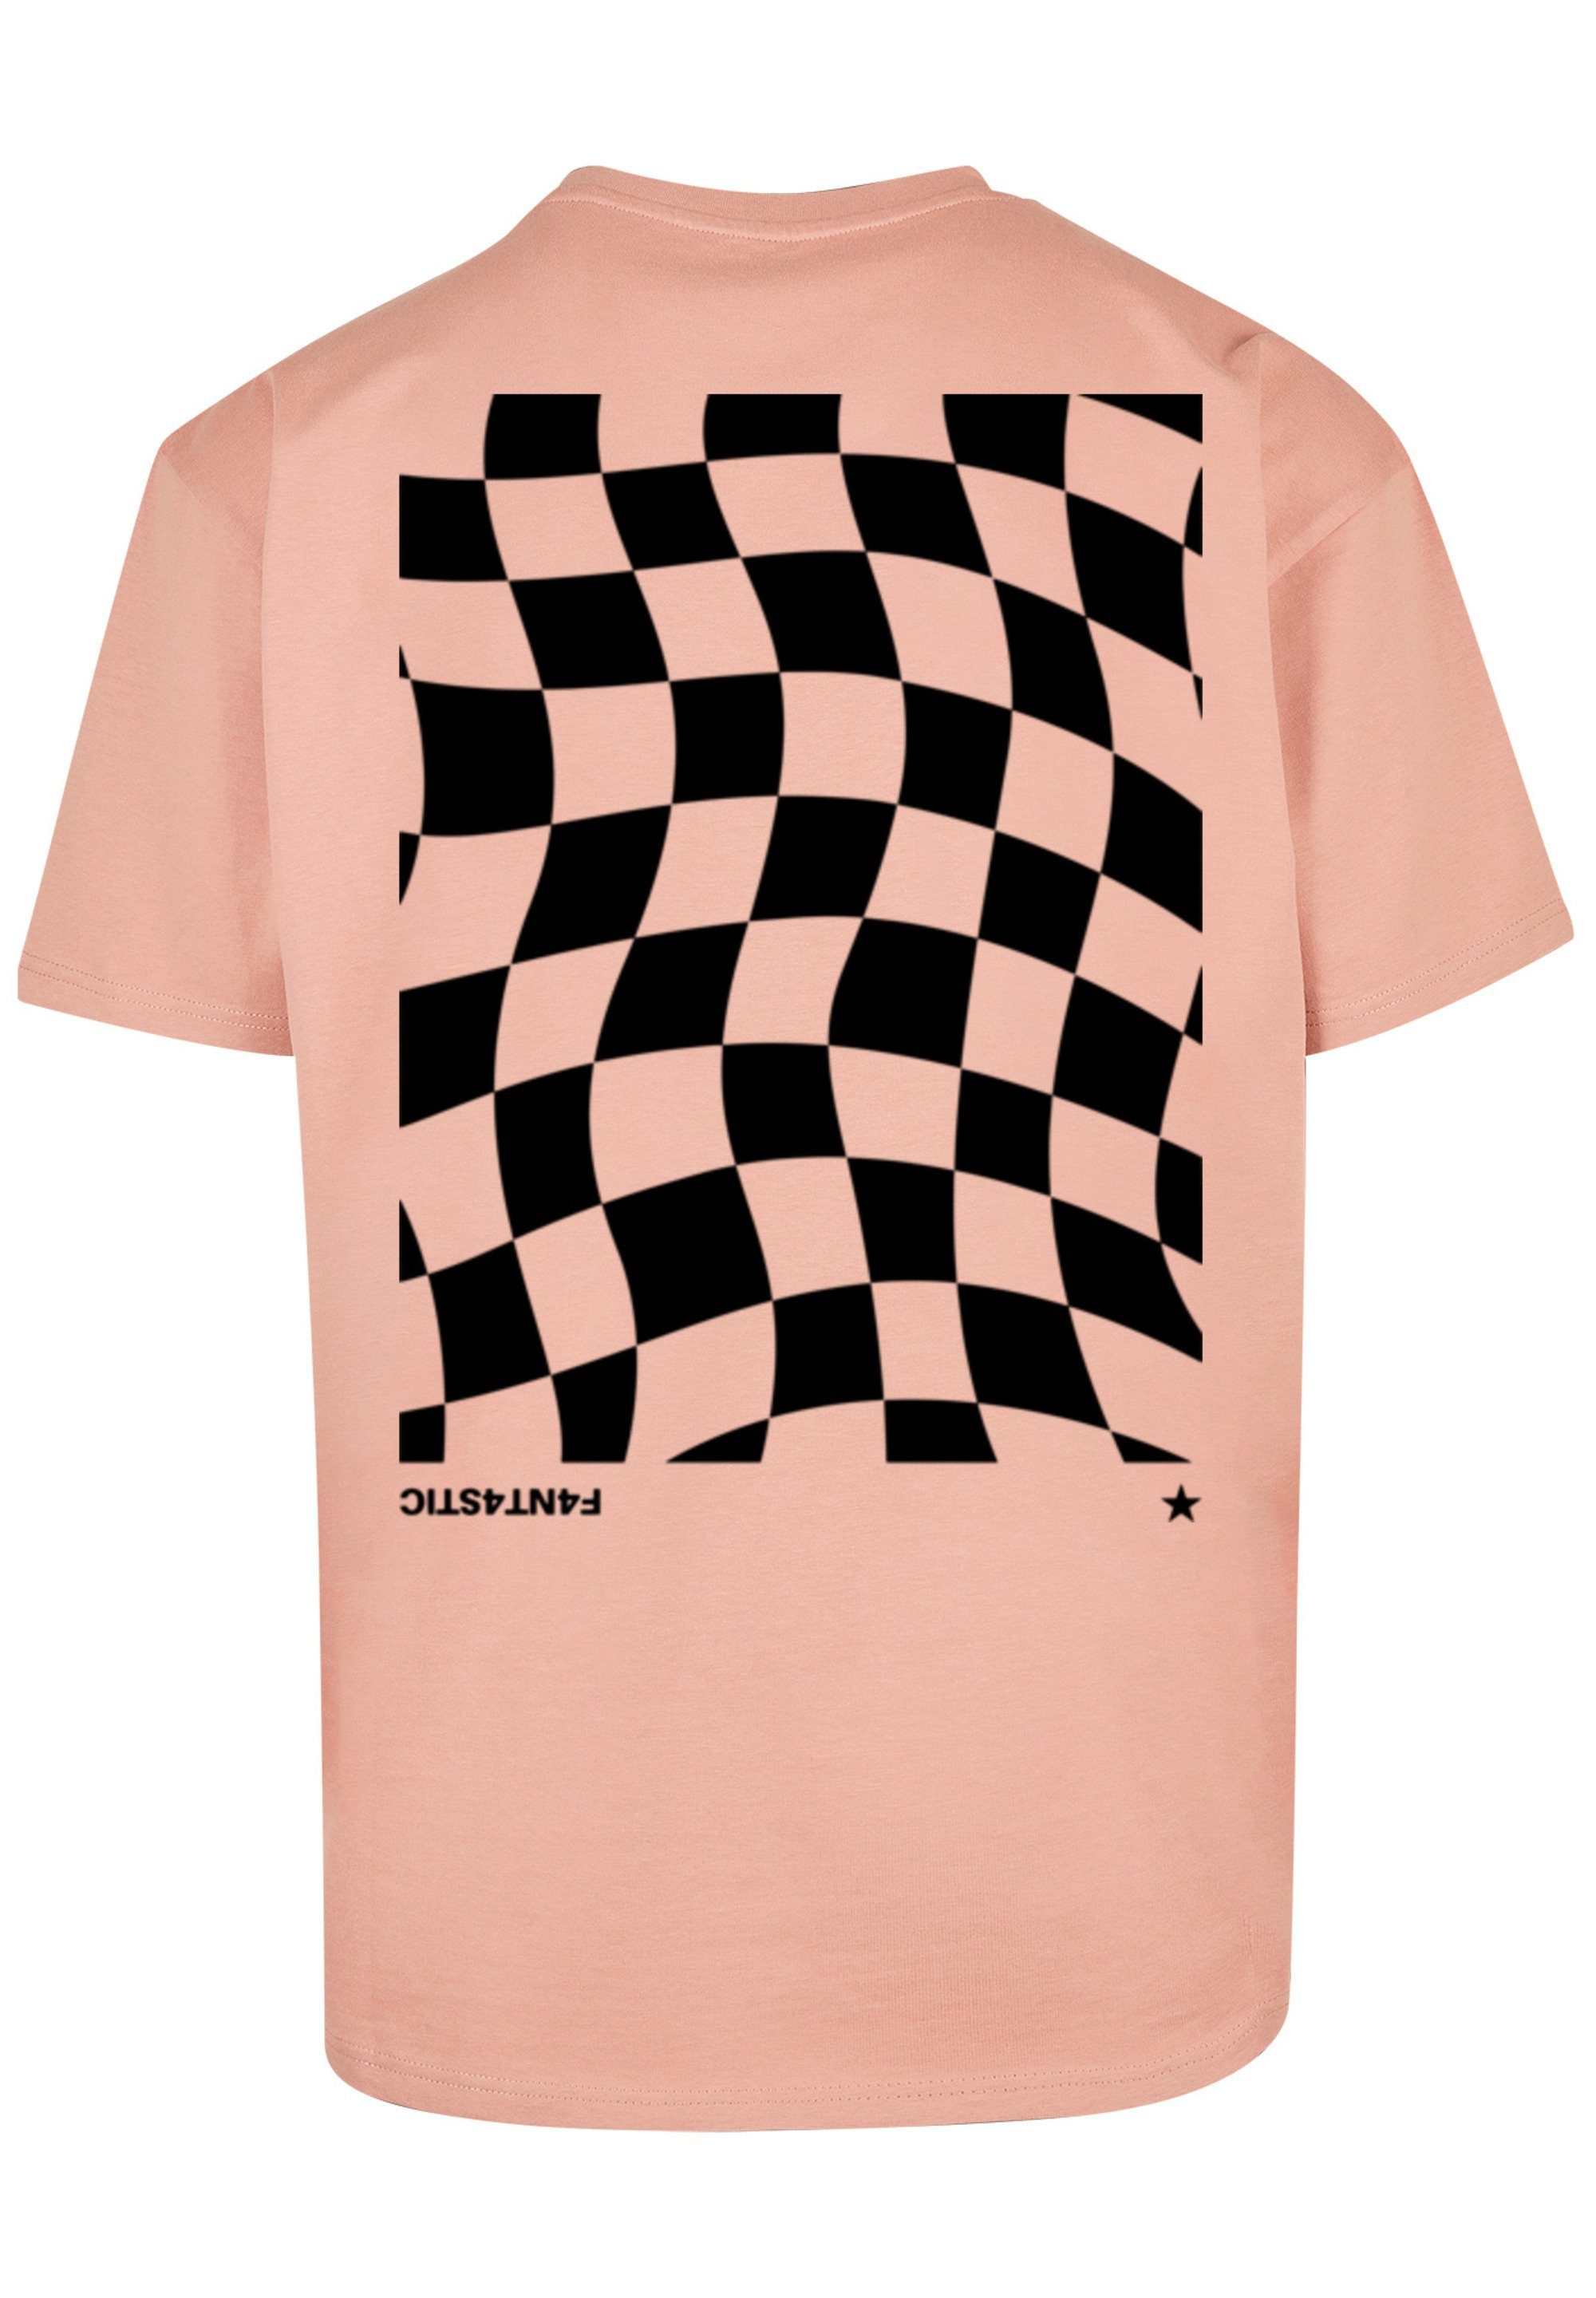 Print Muster Wavy Schach amber T-Shirt F4NT4STIC